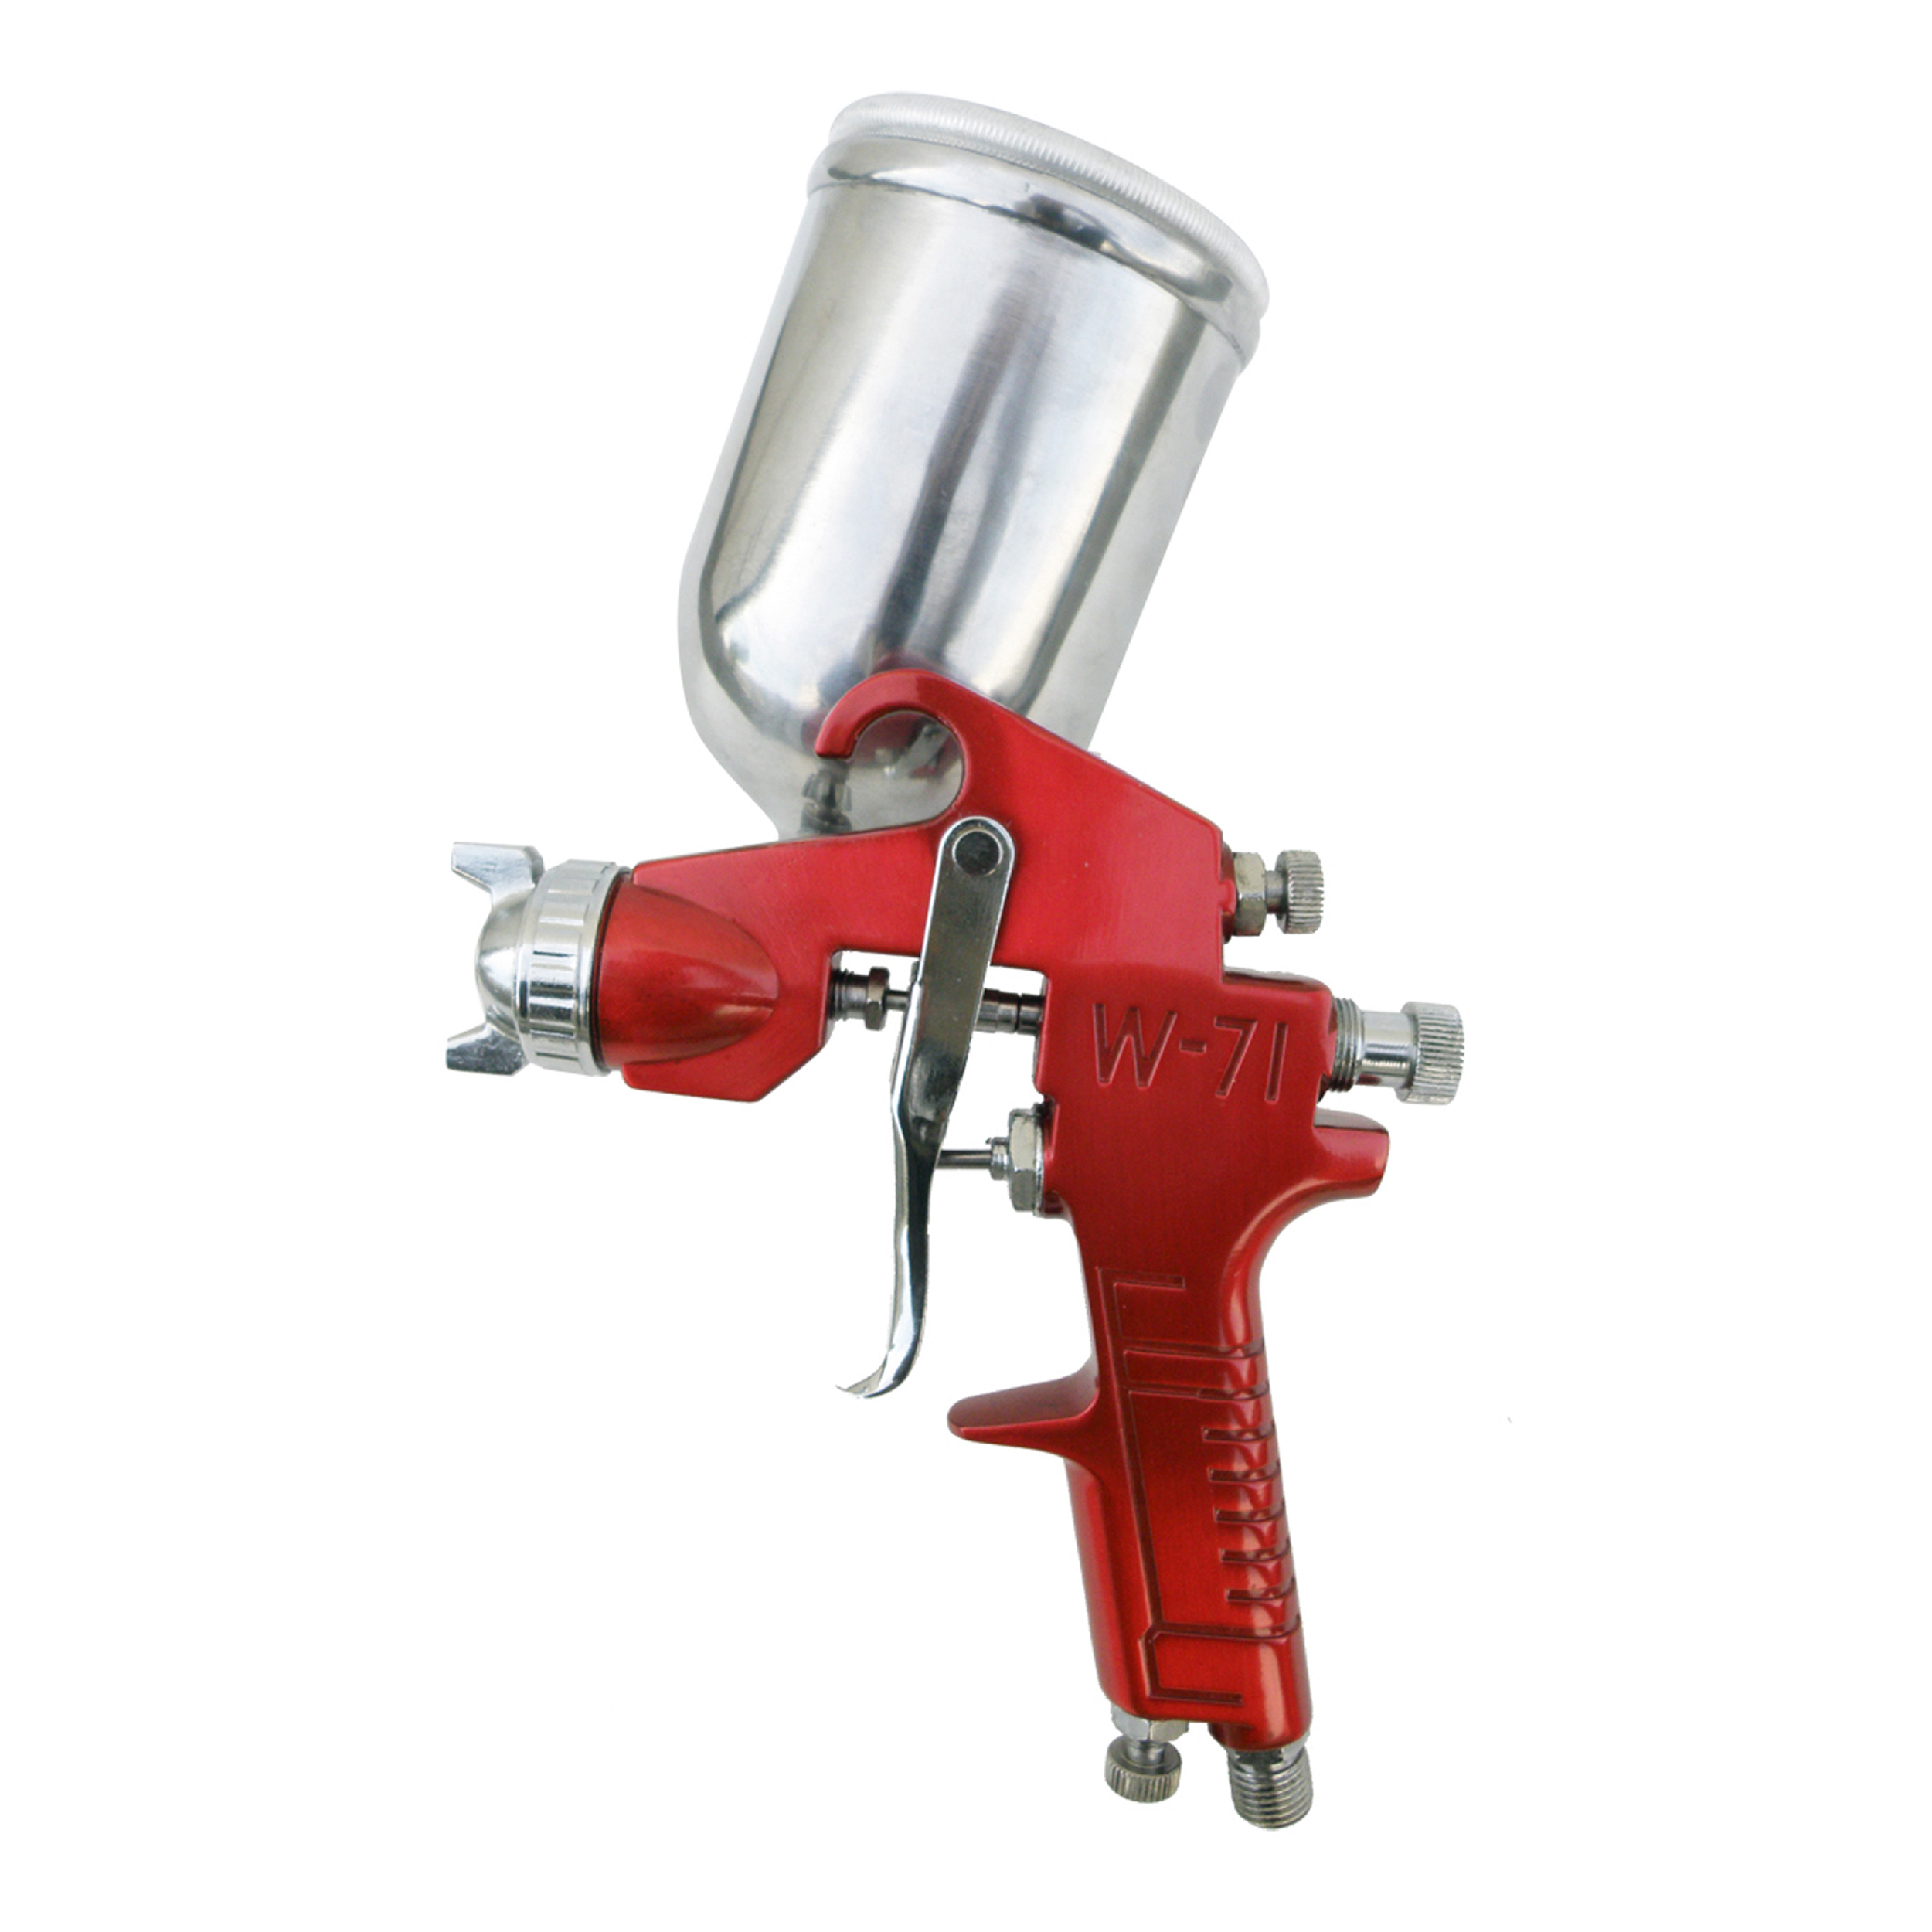 Sp-352 Gravity Feed Spray Gun With Aluminum Swivel Cup